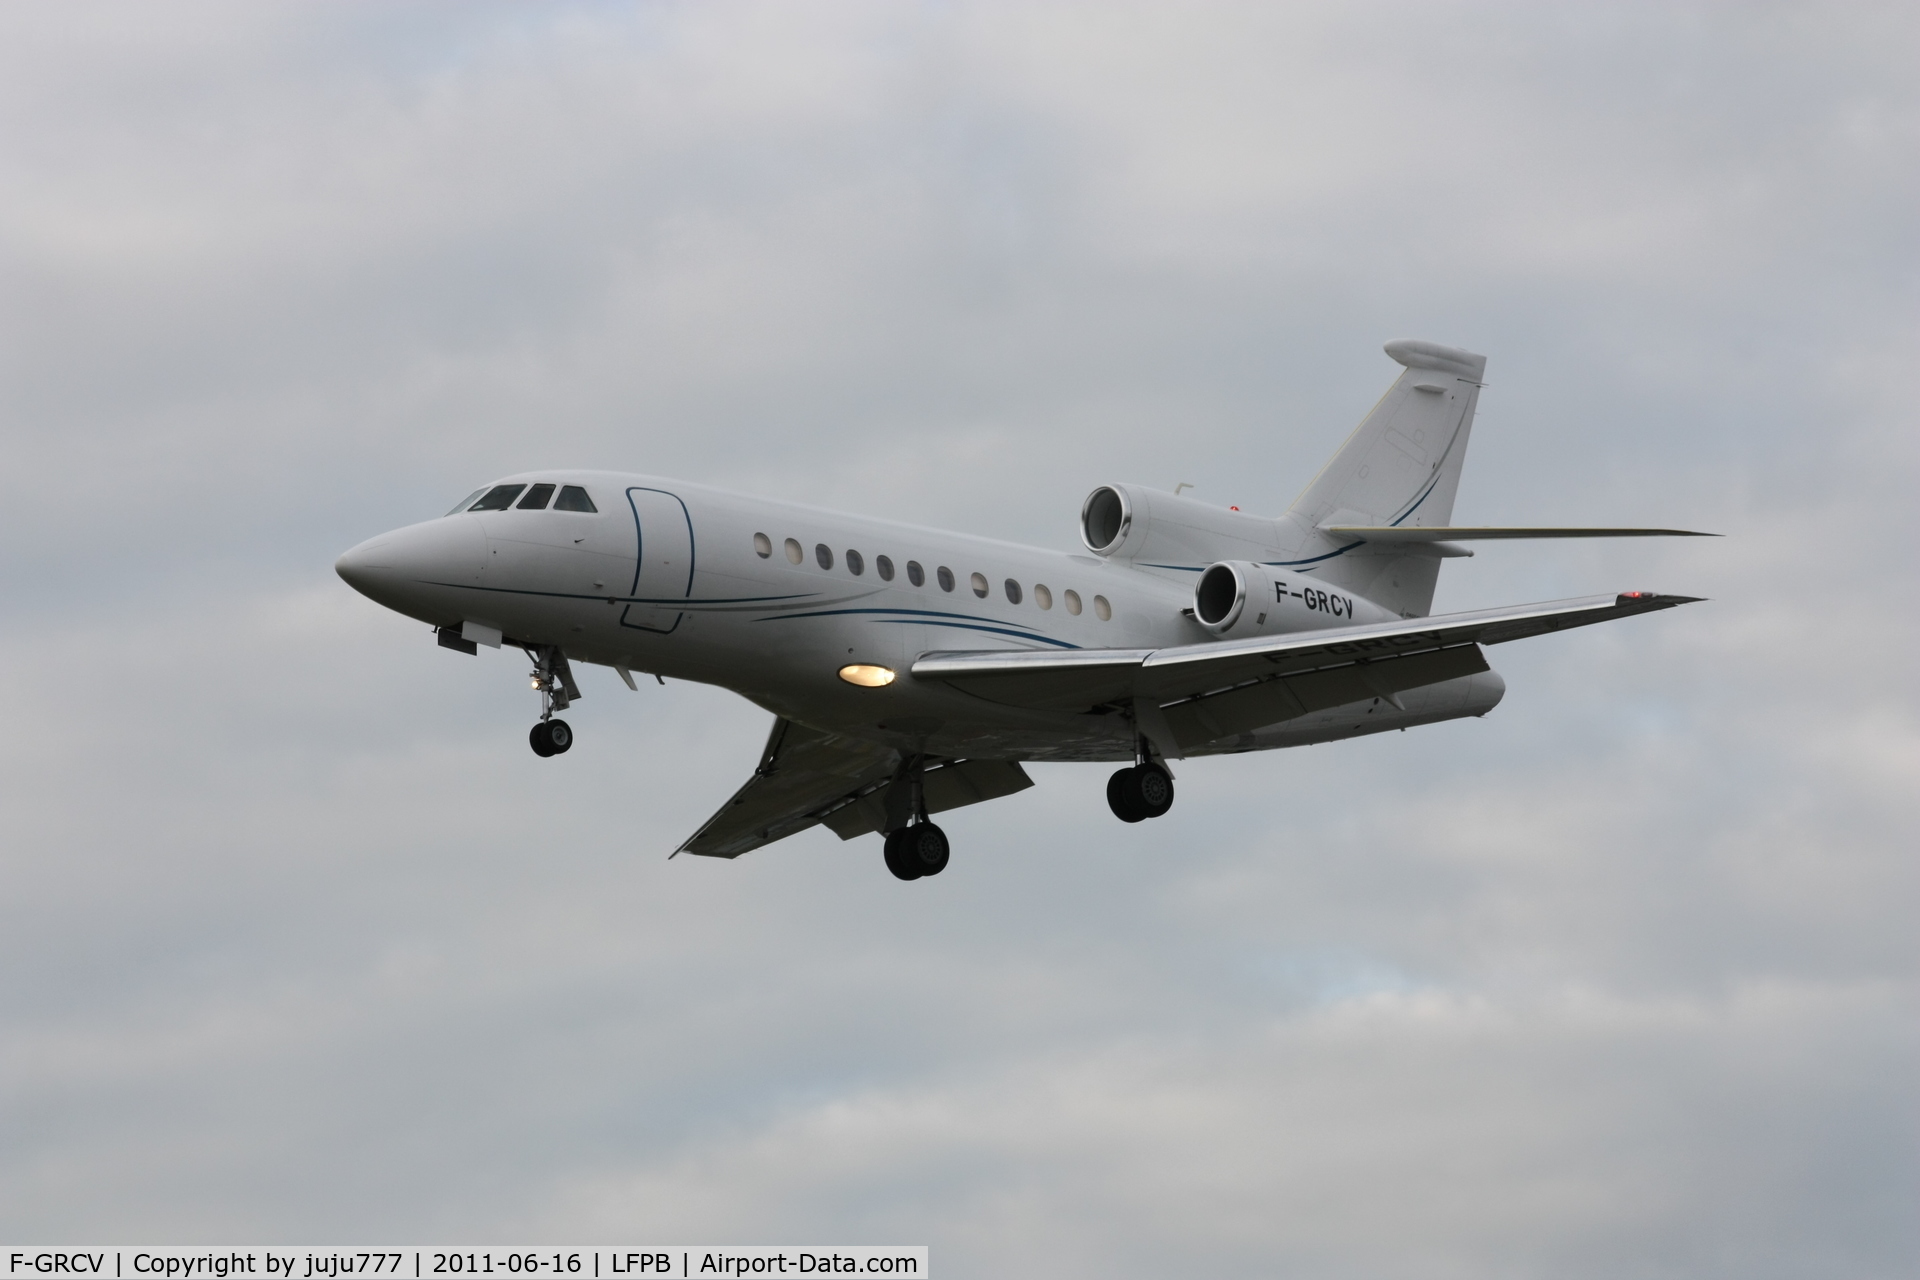 F-GRCV, 2007 Dassault Falcon 900DX C/N 609, on transit at Le Bourget